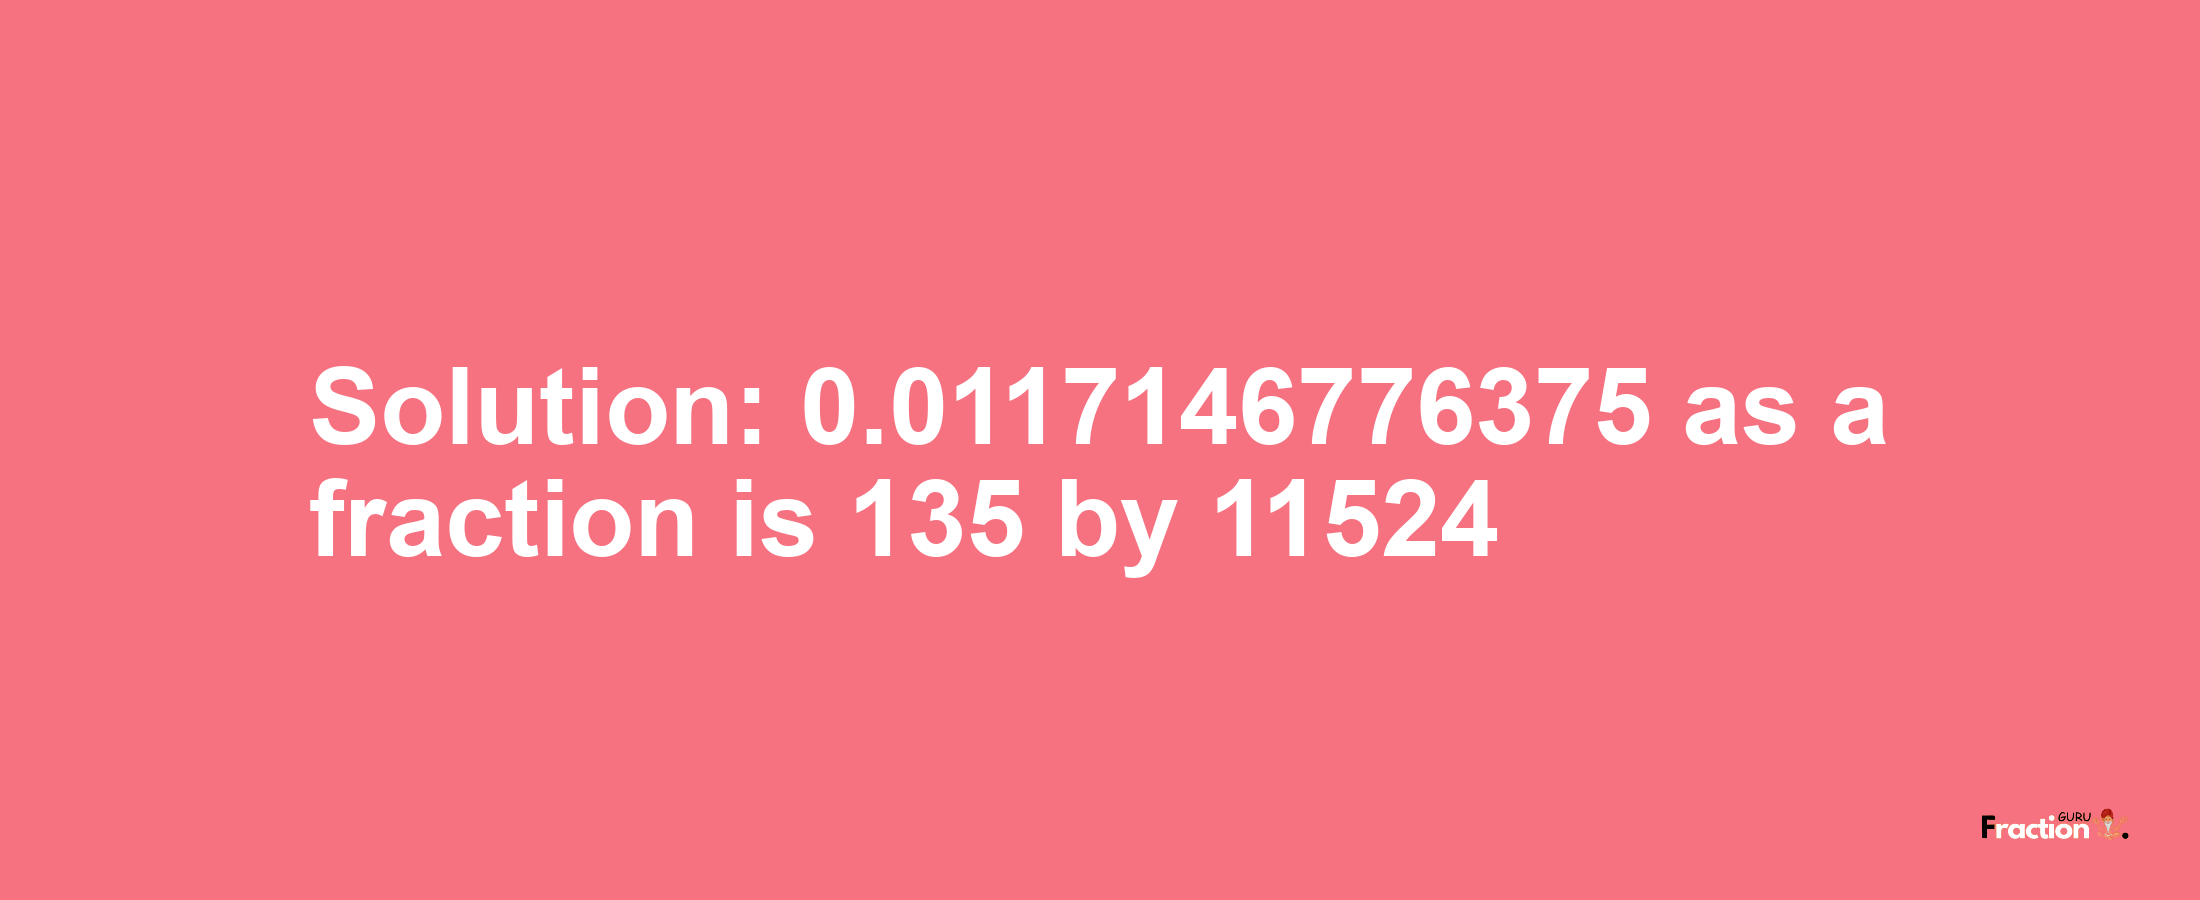 Solution:0.0117146776375 as a fraction is 135/11524